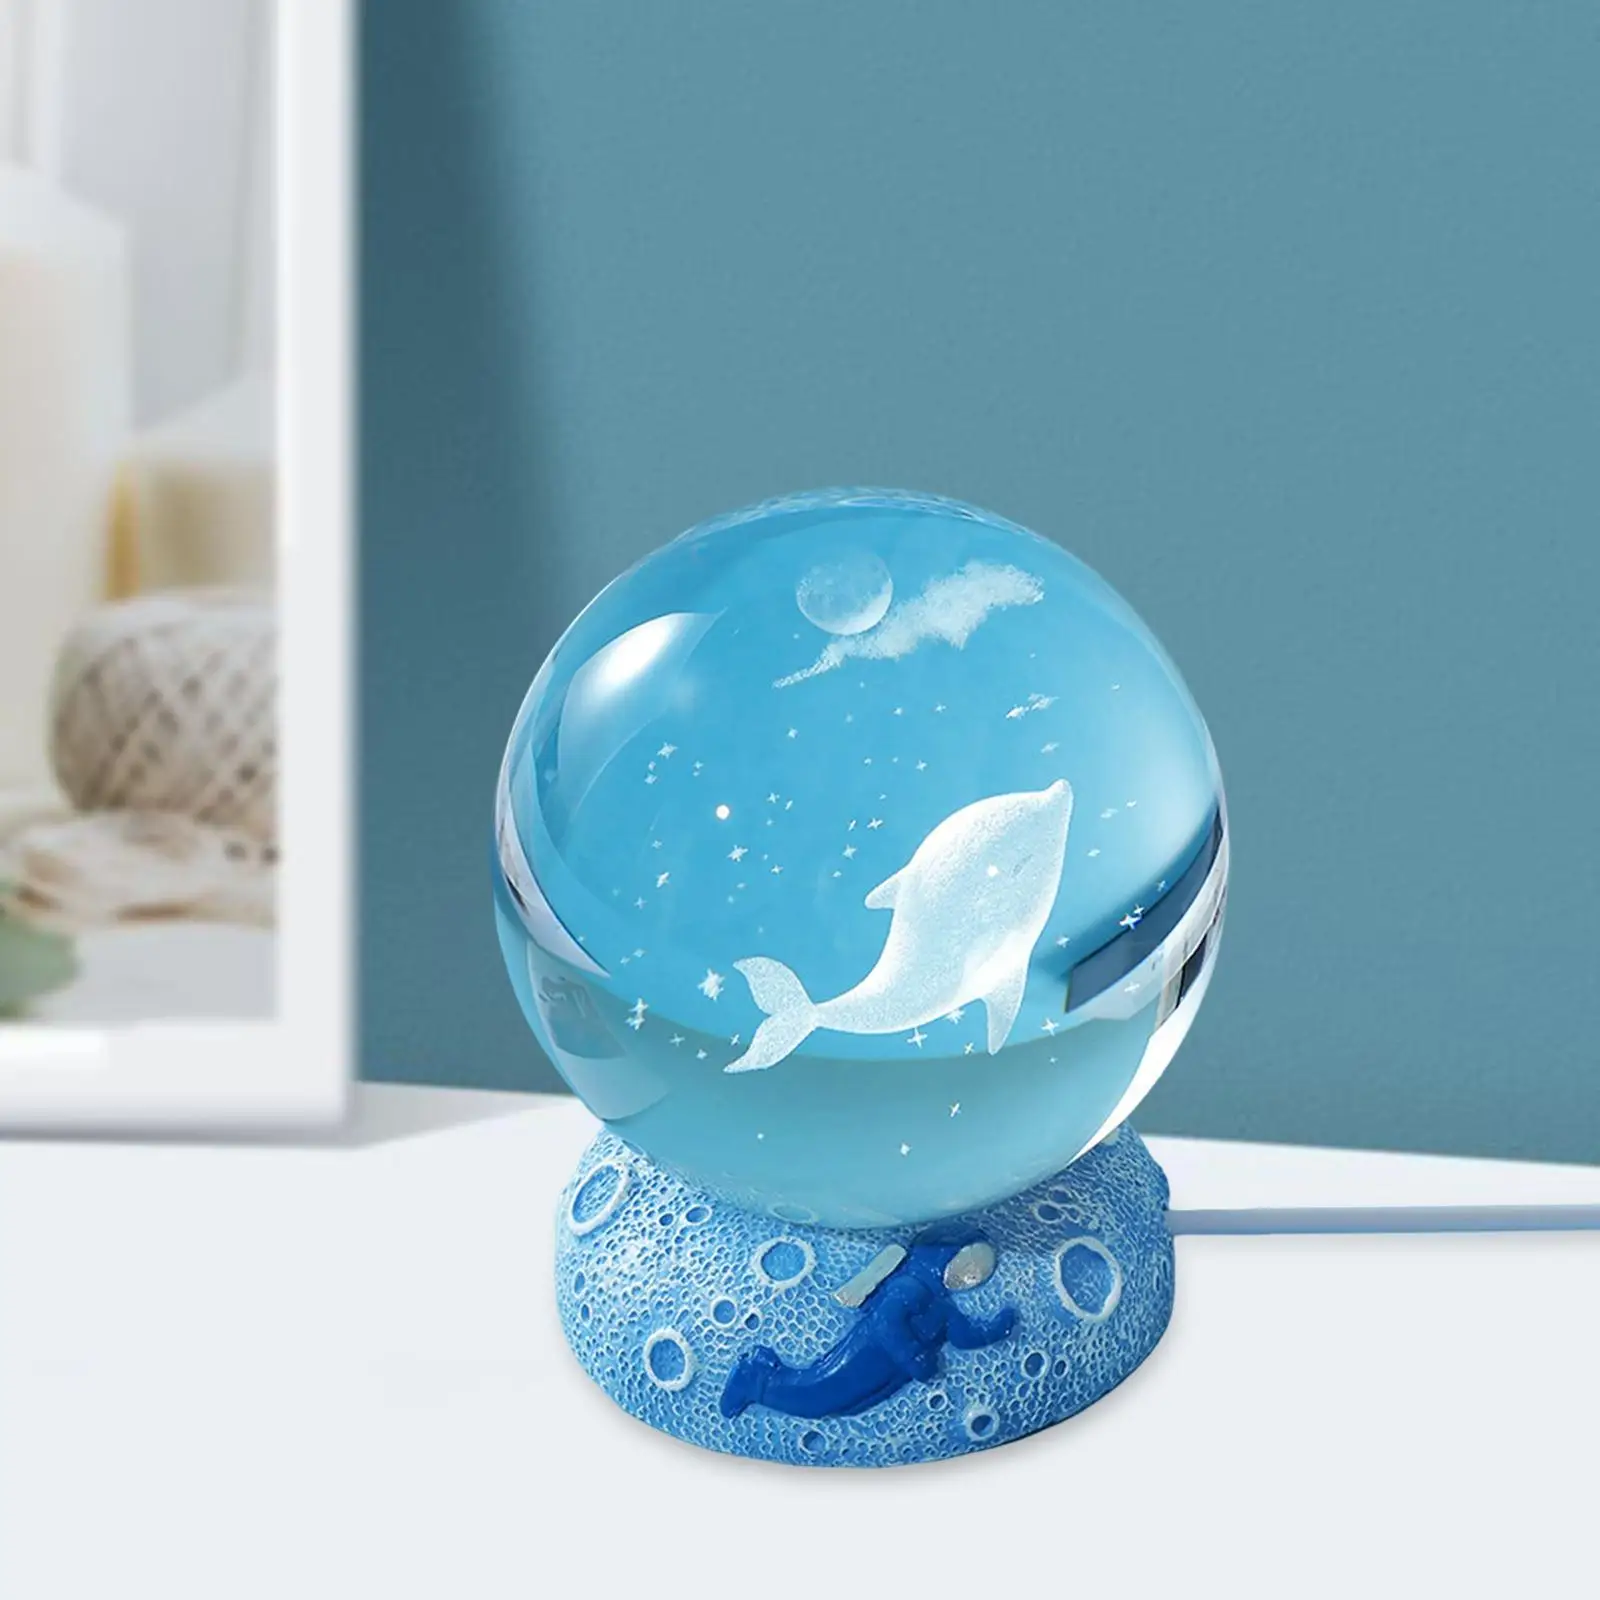 Creative Ball Night Light Bedside Lamp with Base Decorative Moon Light for Living Room Home Party Decoration Ornament